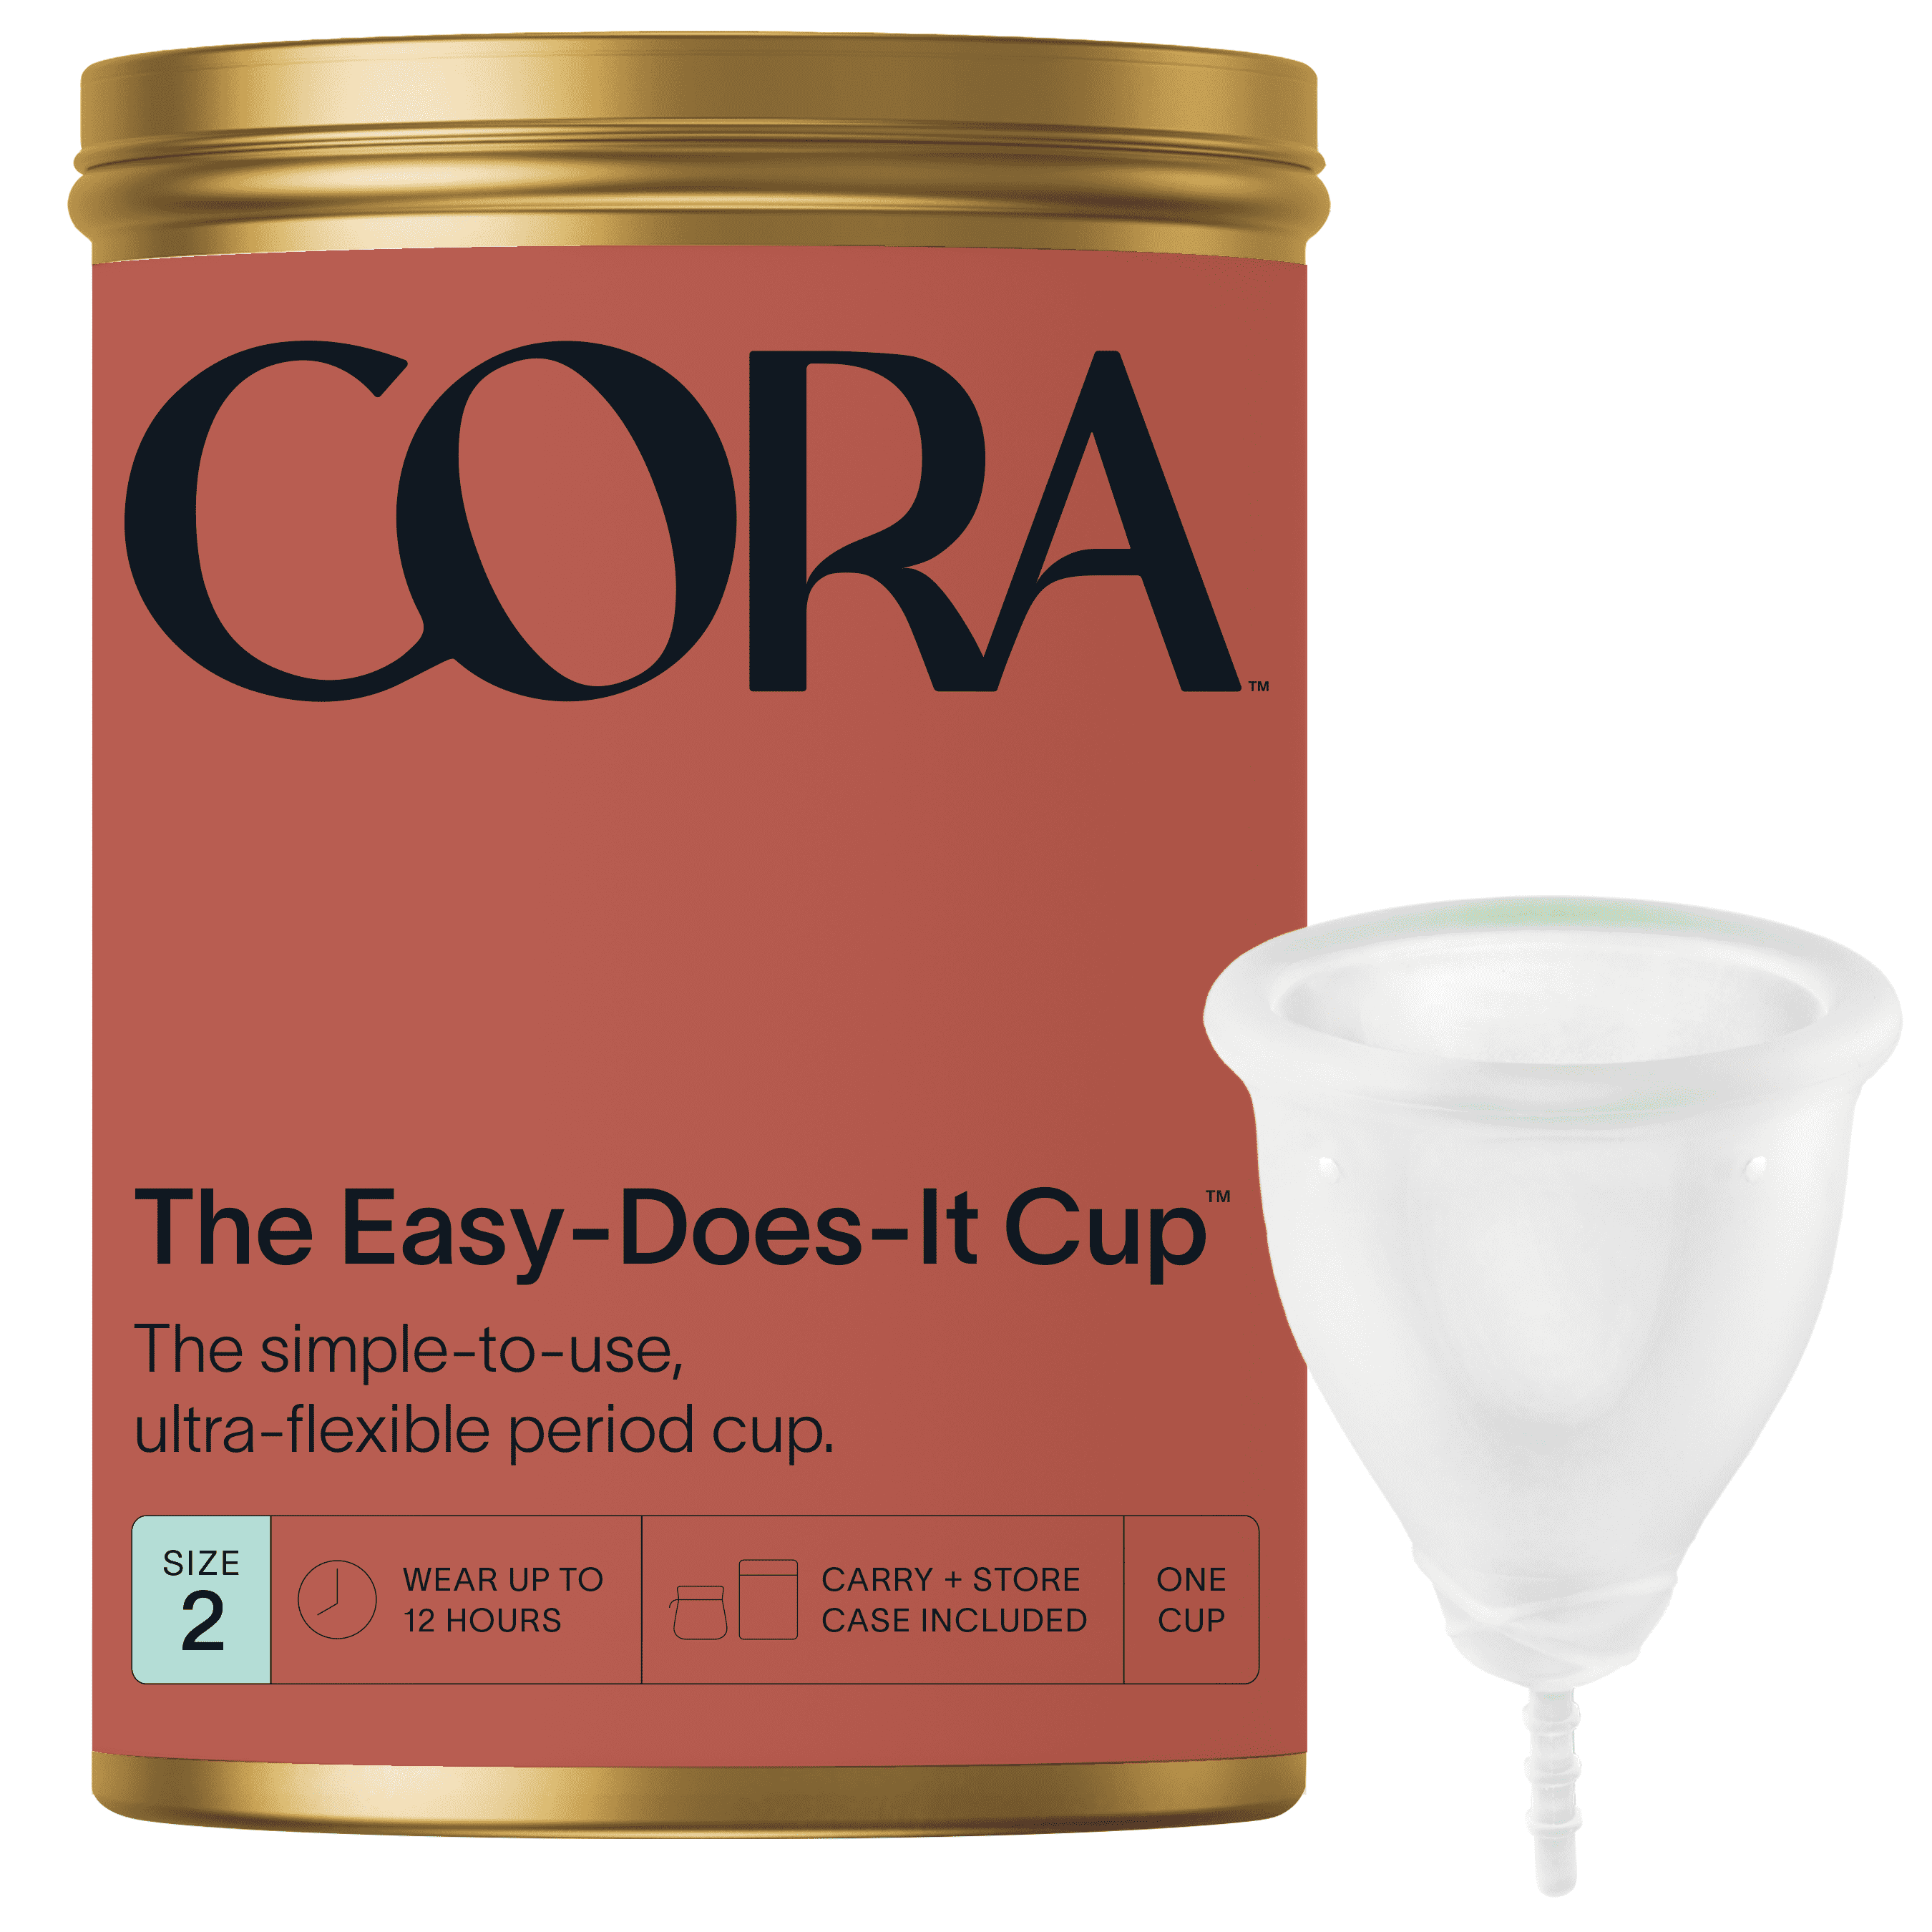  Cora Menstrual Period Cup Comfortable, Easy To Use Soft,  Medical Grade Silicone Flexible Fit Leak Protection, Foldable, Sustainable,  Reusable Alternative To Tampons/Pads